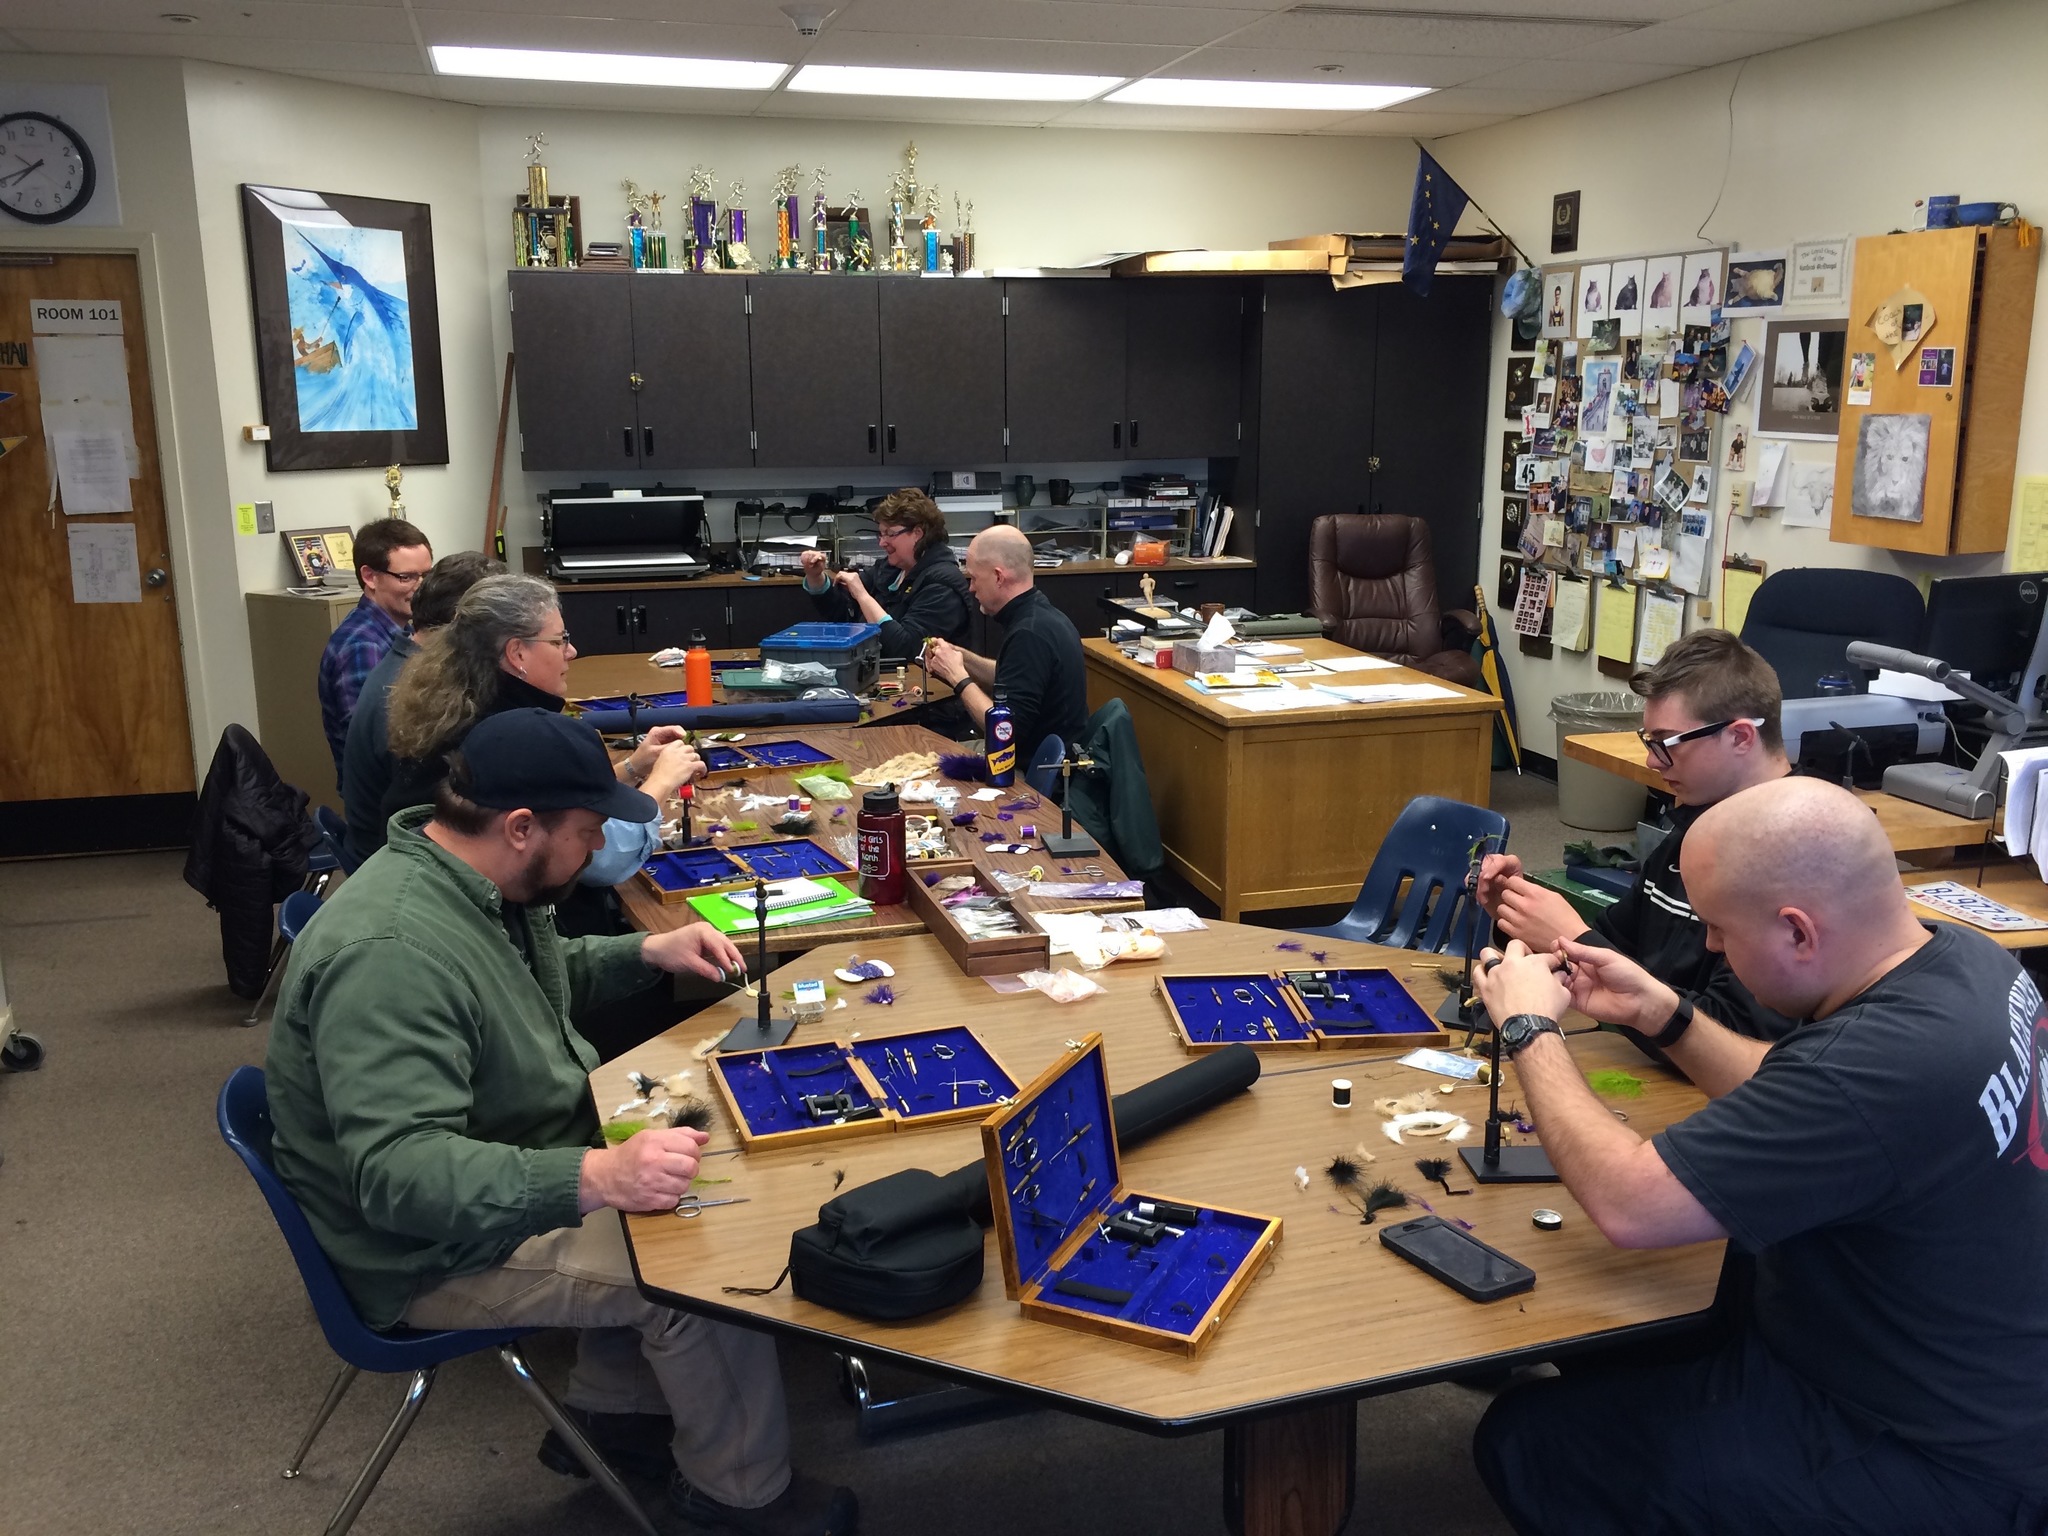 The Beginning Fly Fishing Class at Kenai Peninsula College, tying some flies in preparation for their field trip. (Photo courtesy Dave Atcheson)